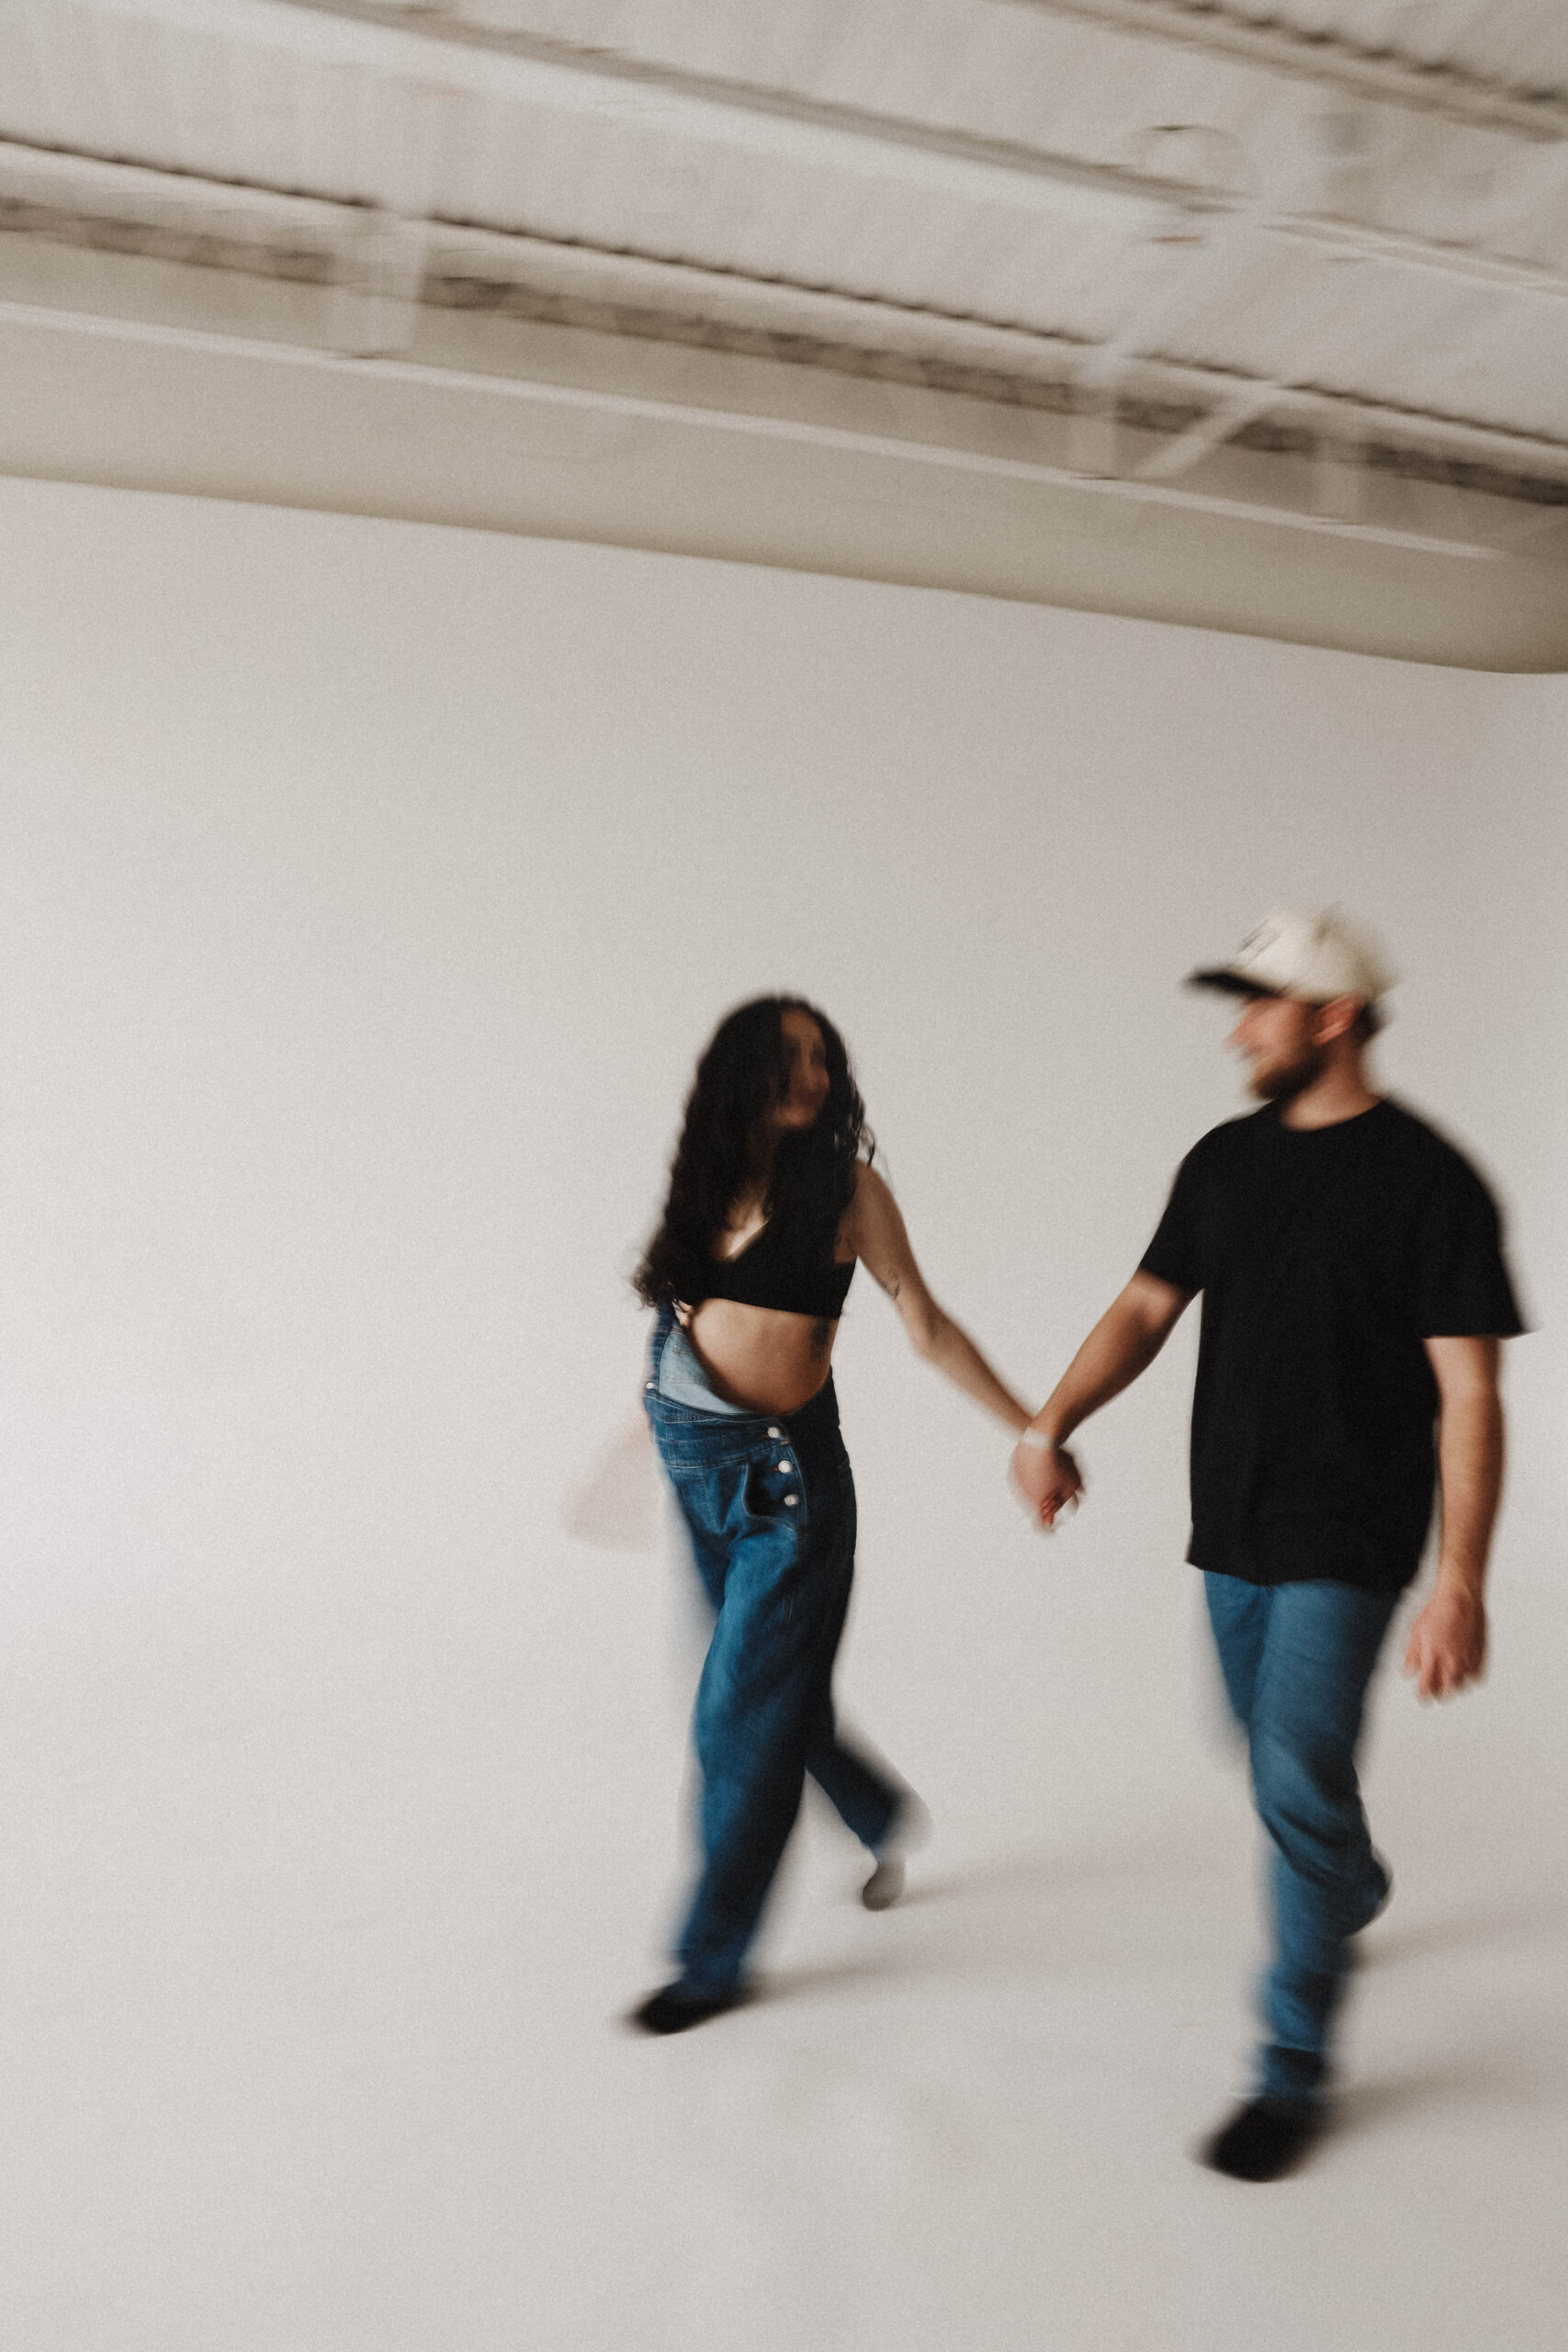 blurry photo of soon to be parents holding hands during a denver maternity photoshoot